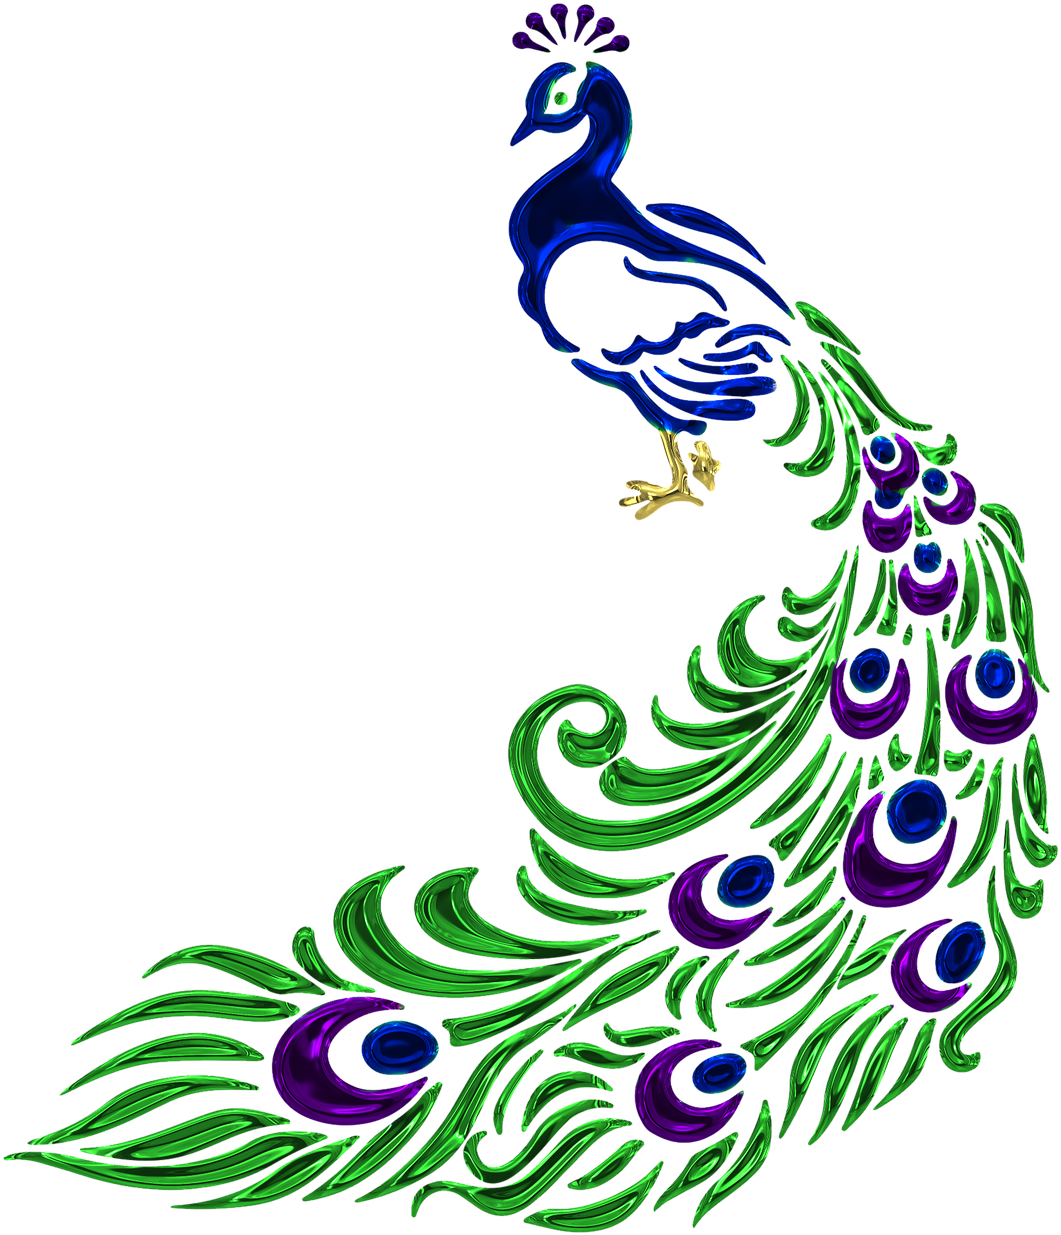 Jewel, Peacock, Jewelry, Feather, Crystal, Gem - Black And White Peacock (1088x1280)